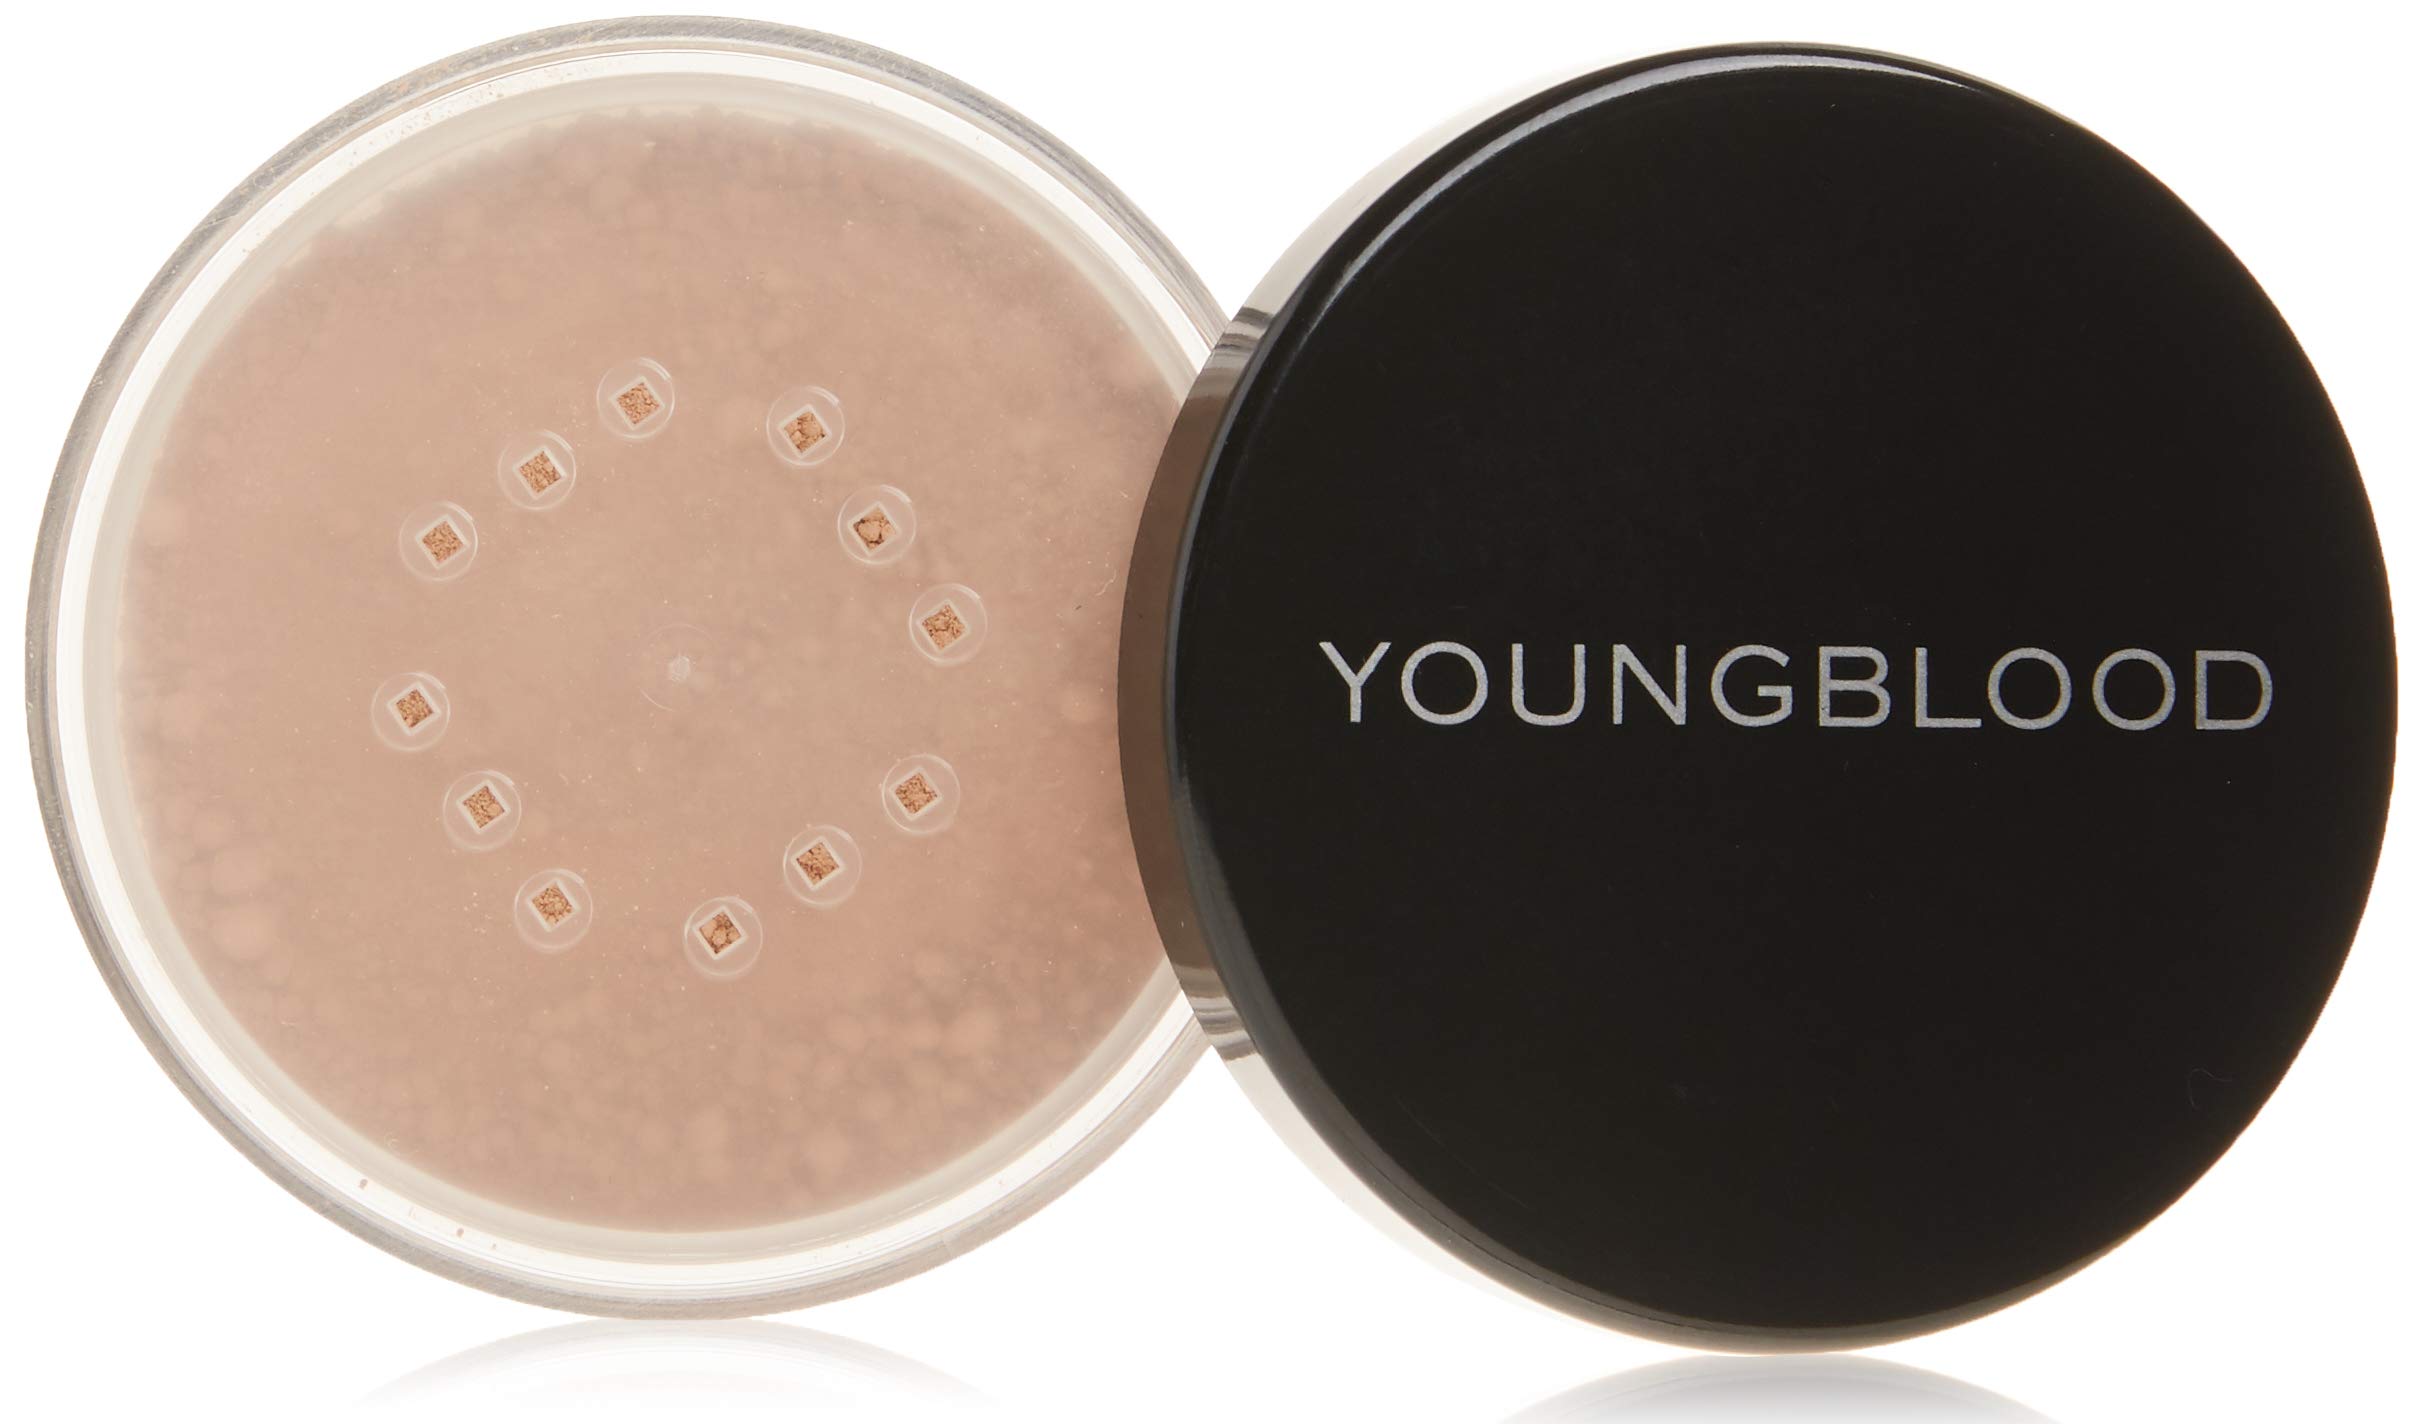 Youngblood Clean Luxury Cosmetics Natural Loose Mineral Foundation, Neutral | Loose Face Powder Foundation Mineral Illuminating Full Coverage Oil Control Matte Lasting | Vegan, Cruelty Free